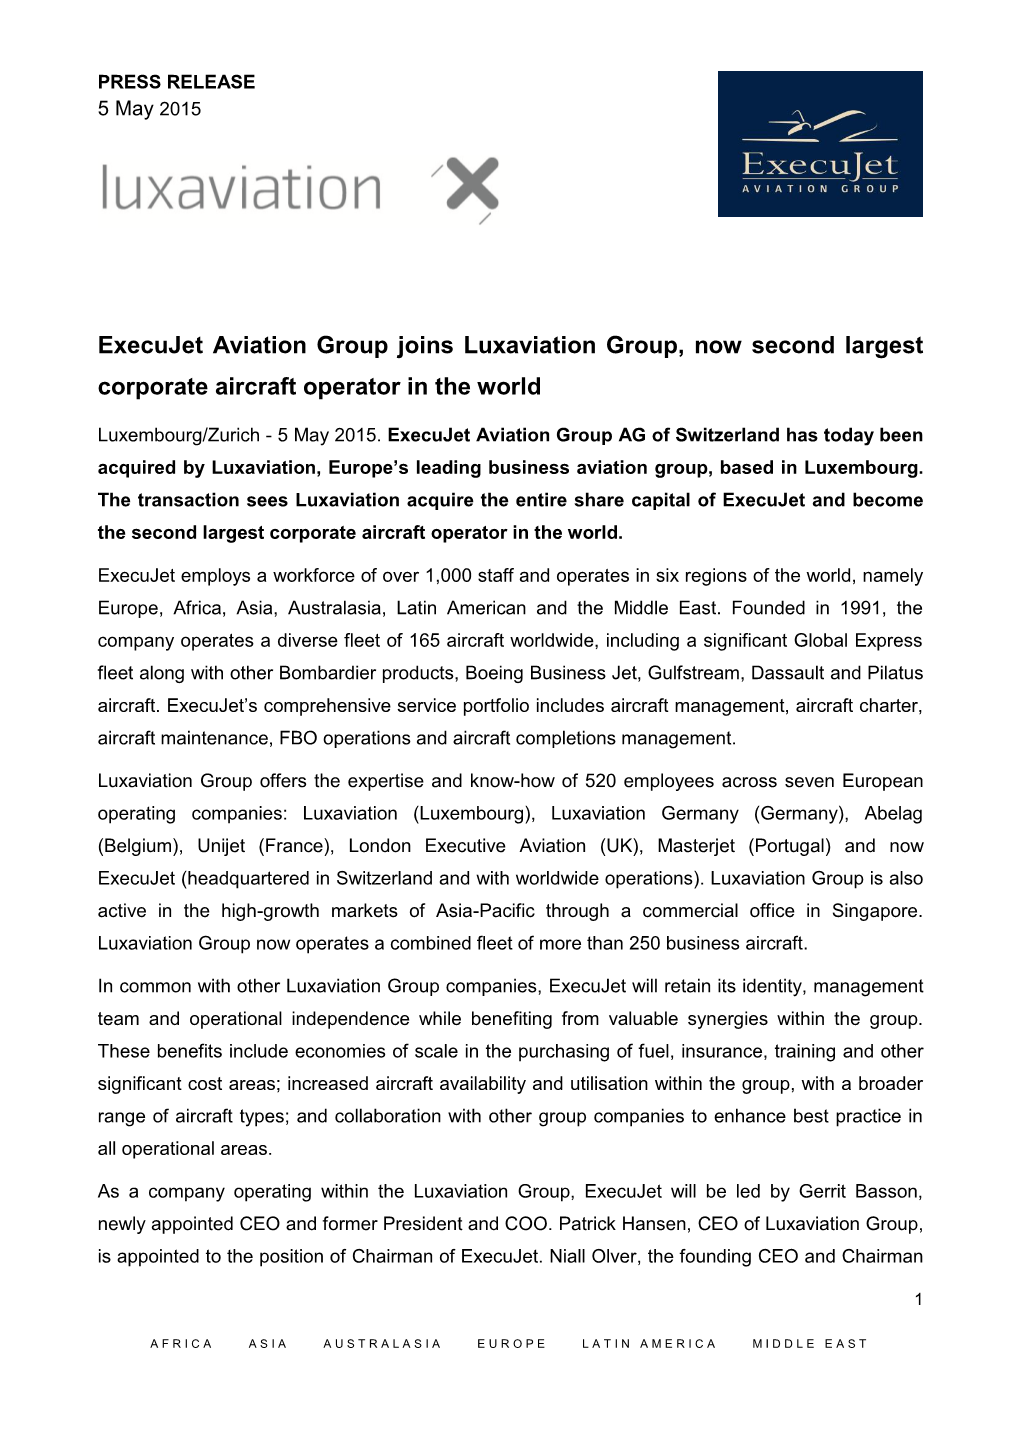 Execujet Aviation Group Joins Luxaviation Group, Now Second Largest Corporate Aircraft Operator in the World